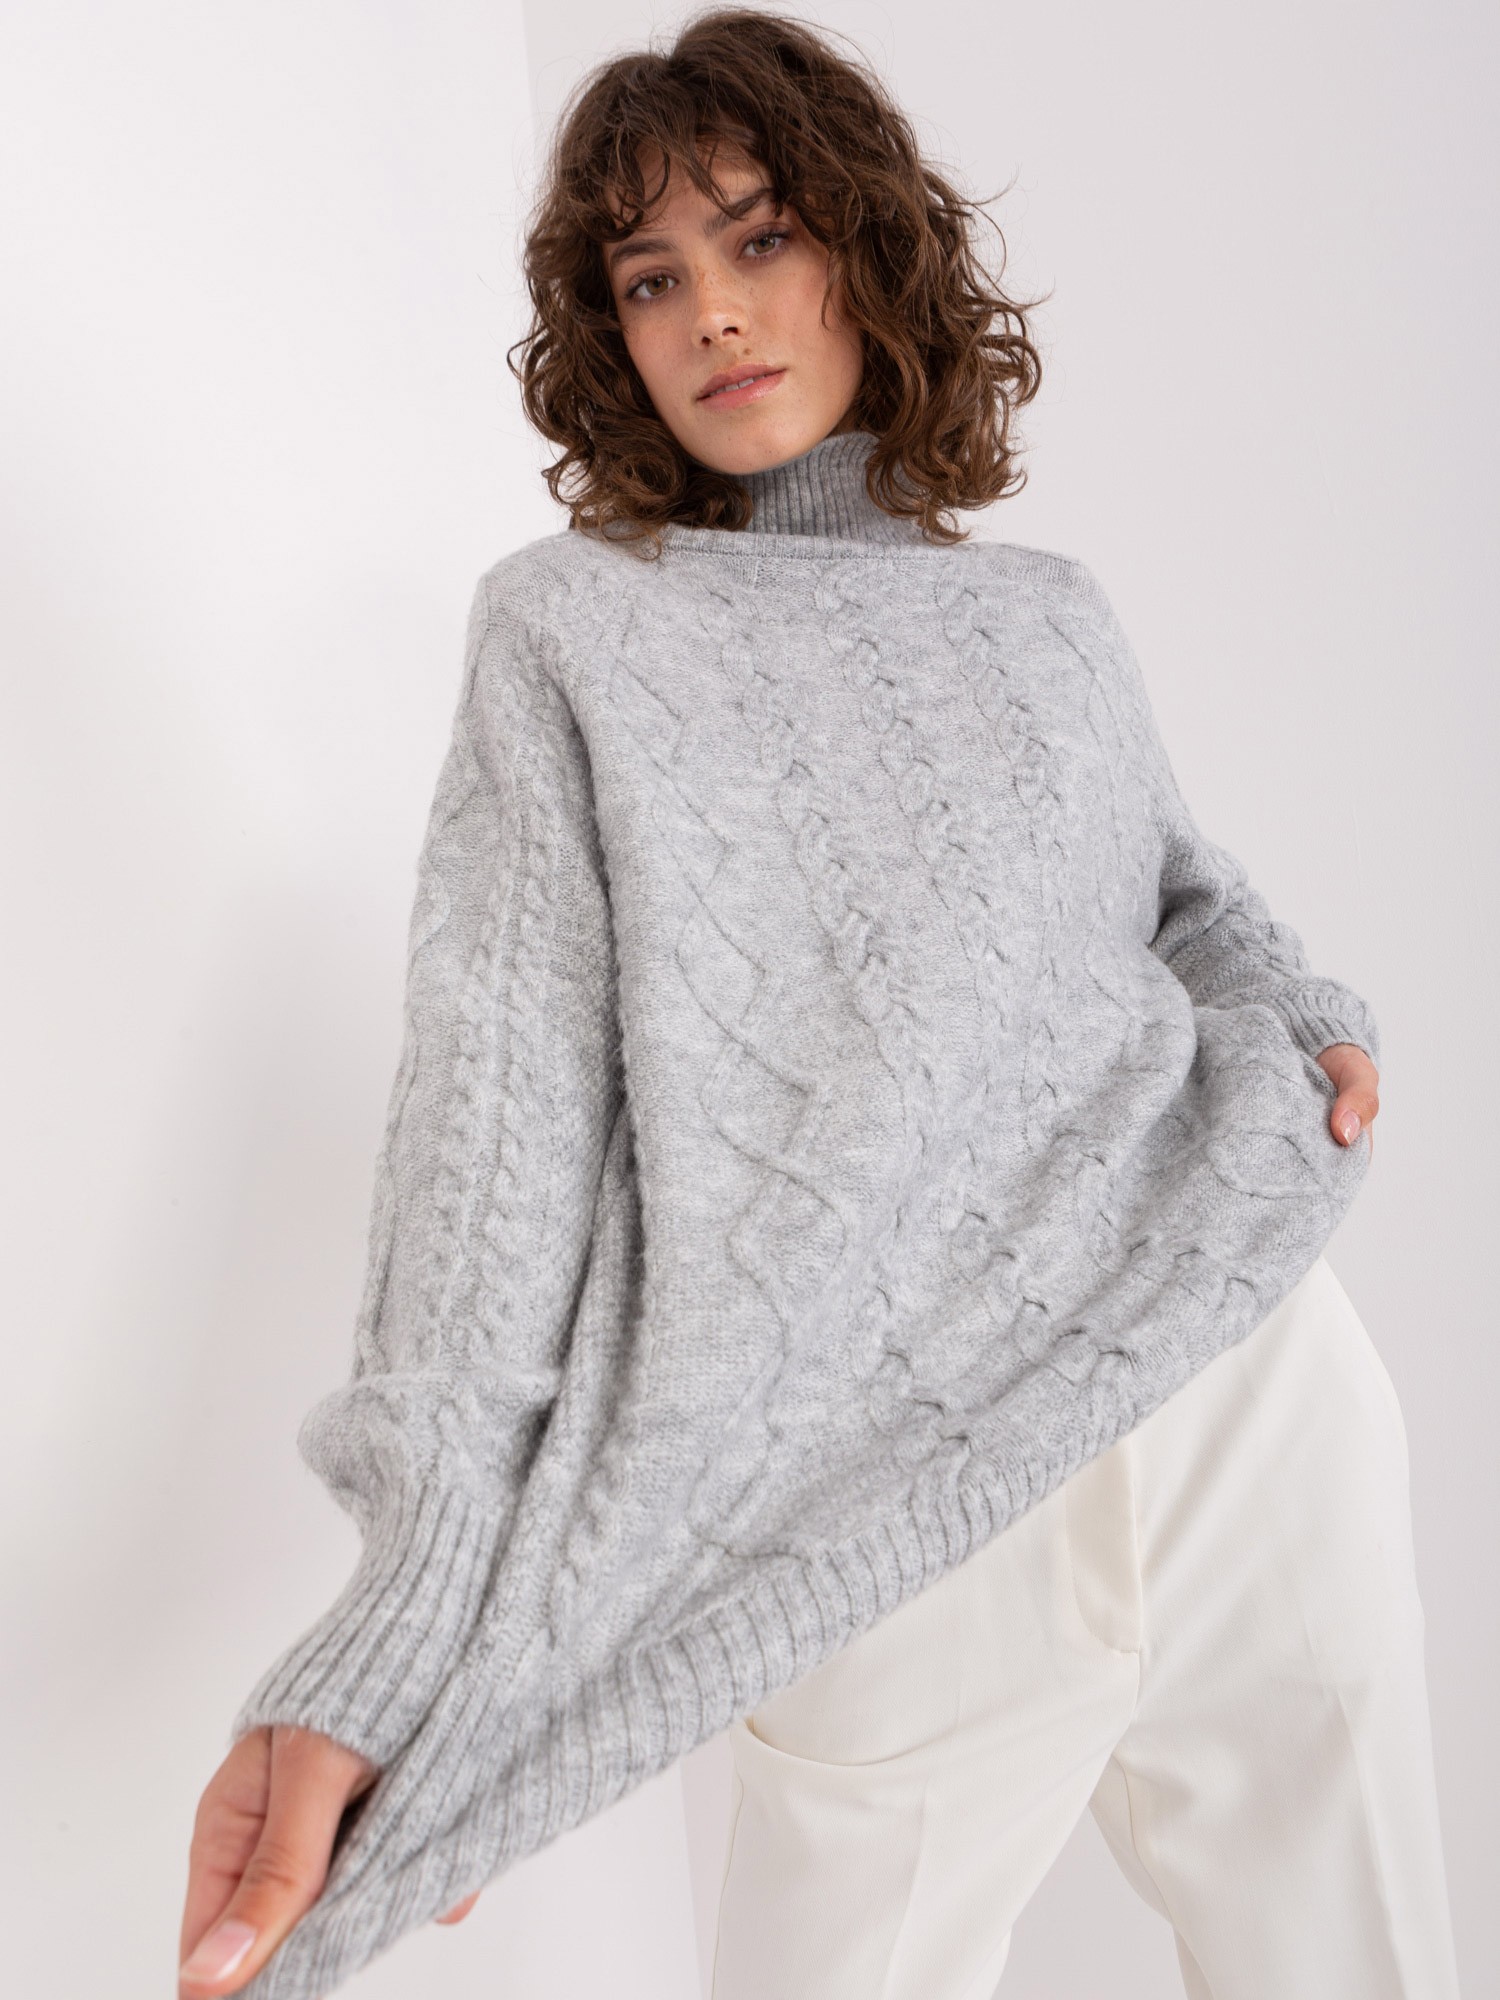 Grey sweater with oversize cables